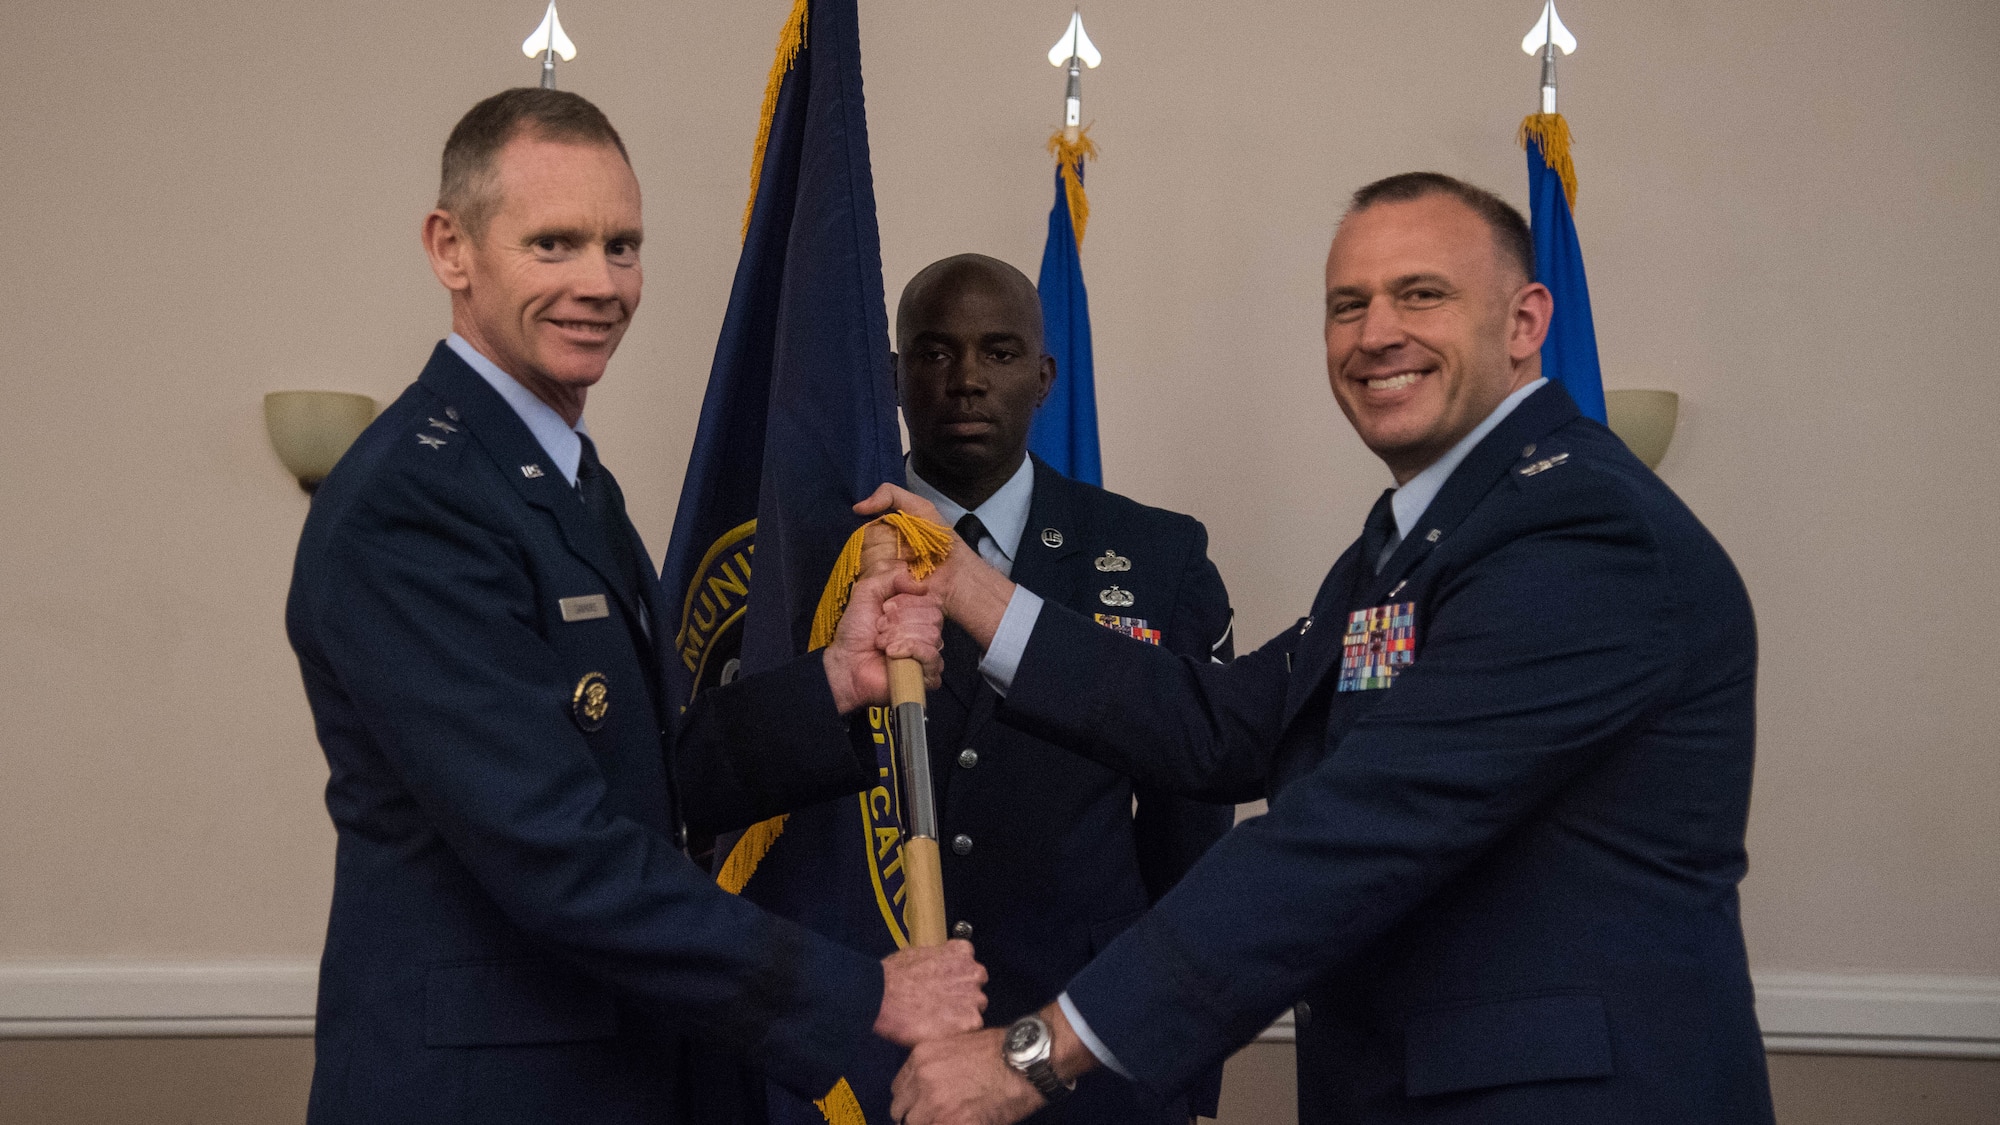 Col. Matthew W. McDaniel, right, incoming Standoff Munitions Application Center commander, receives the guidon from Maj. Gen. James C. Dawkins Jr., left, 8th Air Force and Joint-Global Strike Operations Center commander, during an assumption of command ceremony at Barksdale Air Force Base, Louisiana, August 9, 2019. SMAC is a mission planning cell within the J-GSOC that focuses on standoff weapons routing. The unit was activated Aug. 24, 2018. (U.S. Air Force photo by Airman Jacob B. Wrightsman)